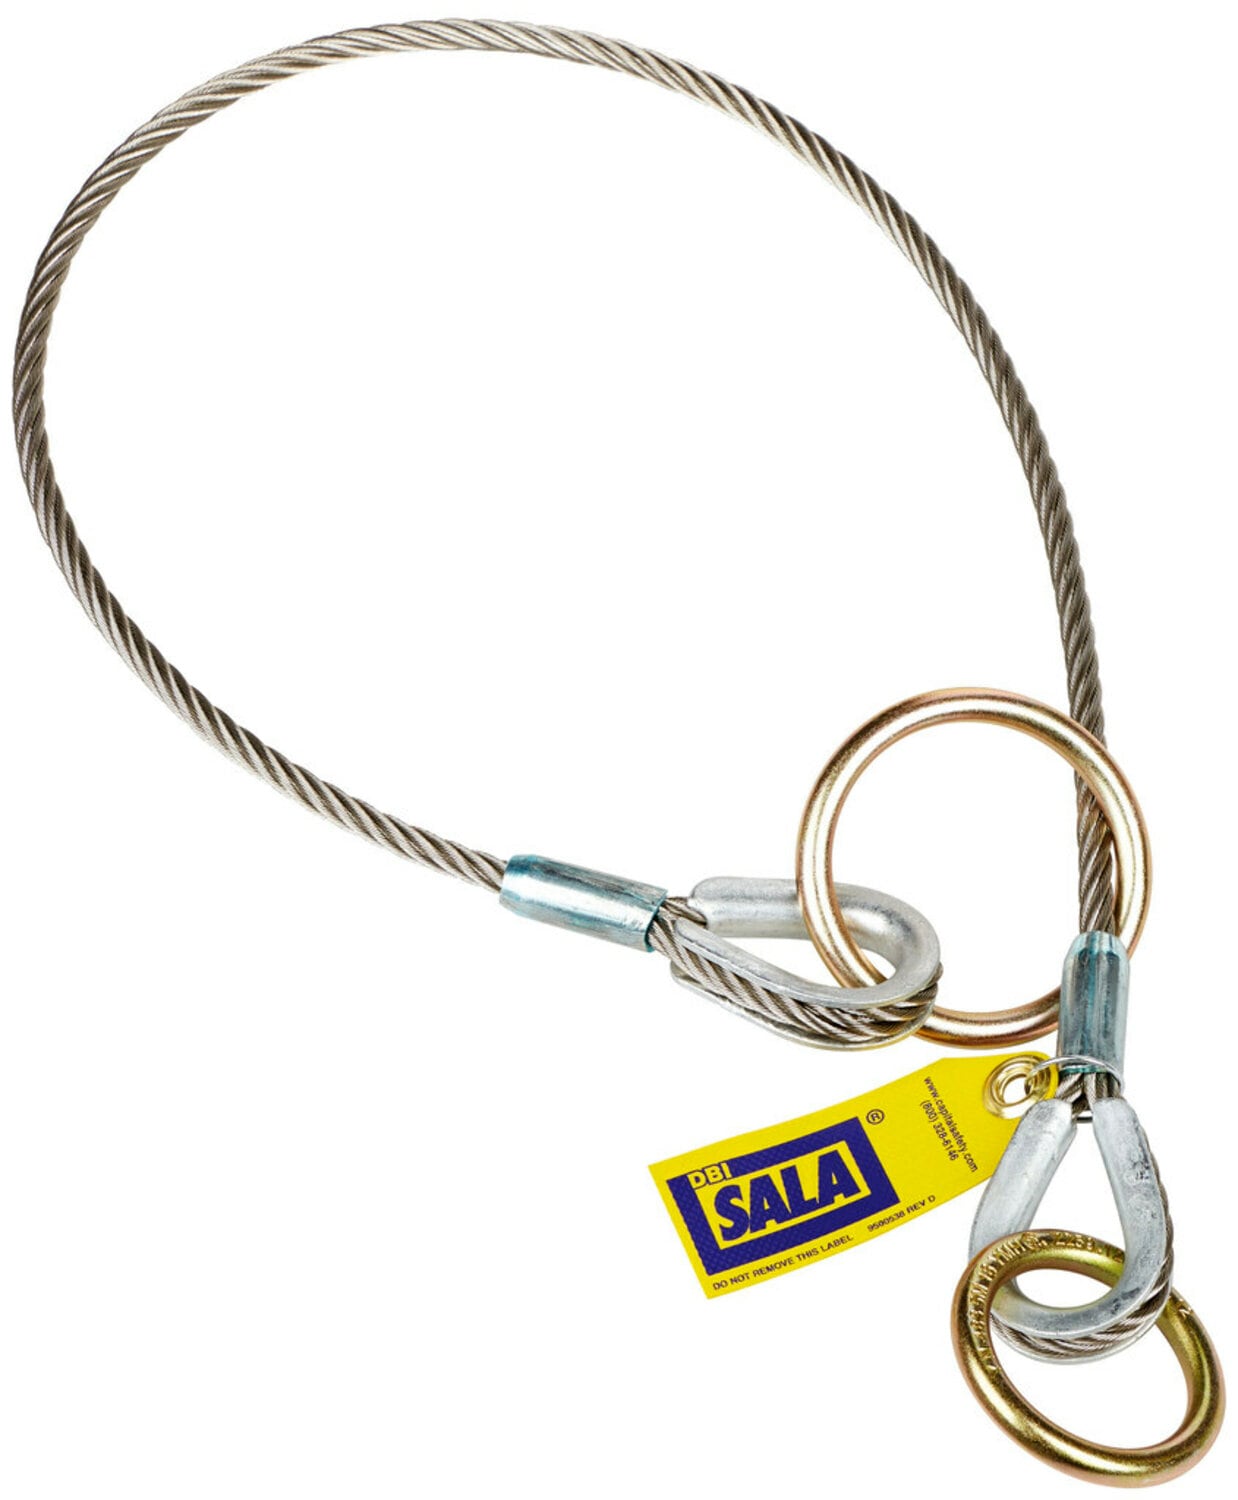 7100231779 - 3M DBI-SALA Pass-Thru Cable Tie-Off Adapter Anchor 5900553, Stainless
Steel, 8 ft